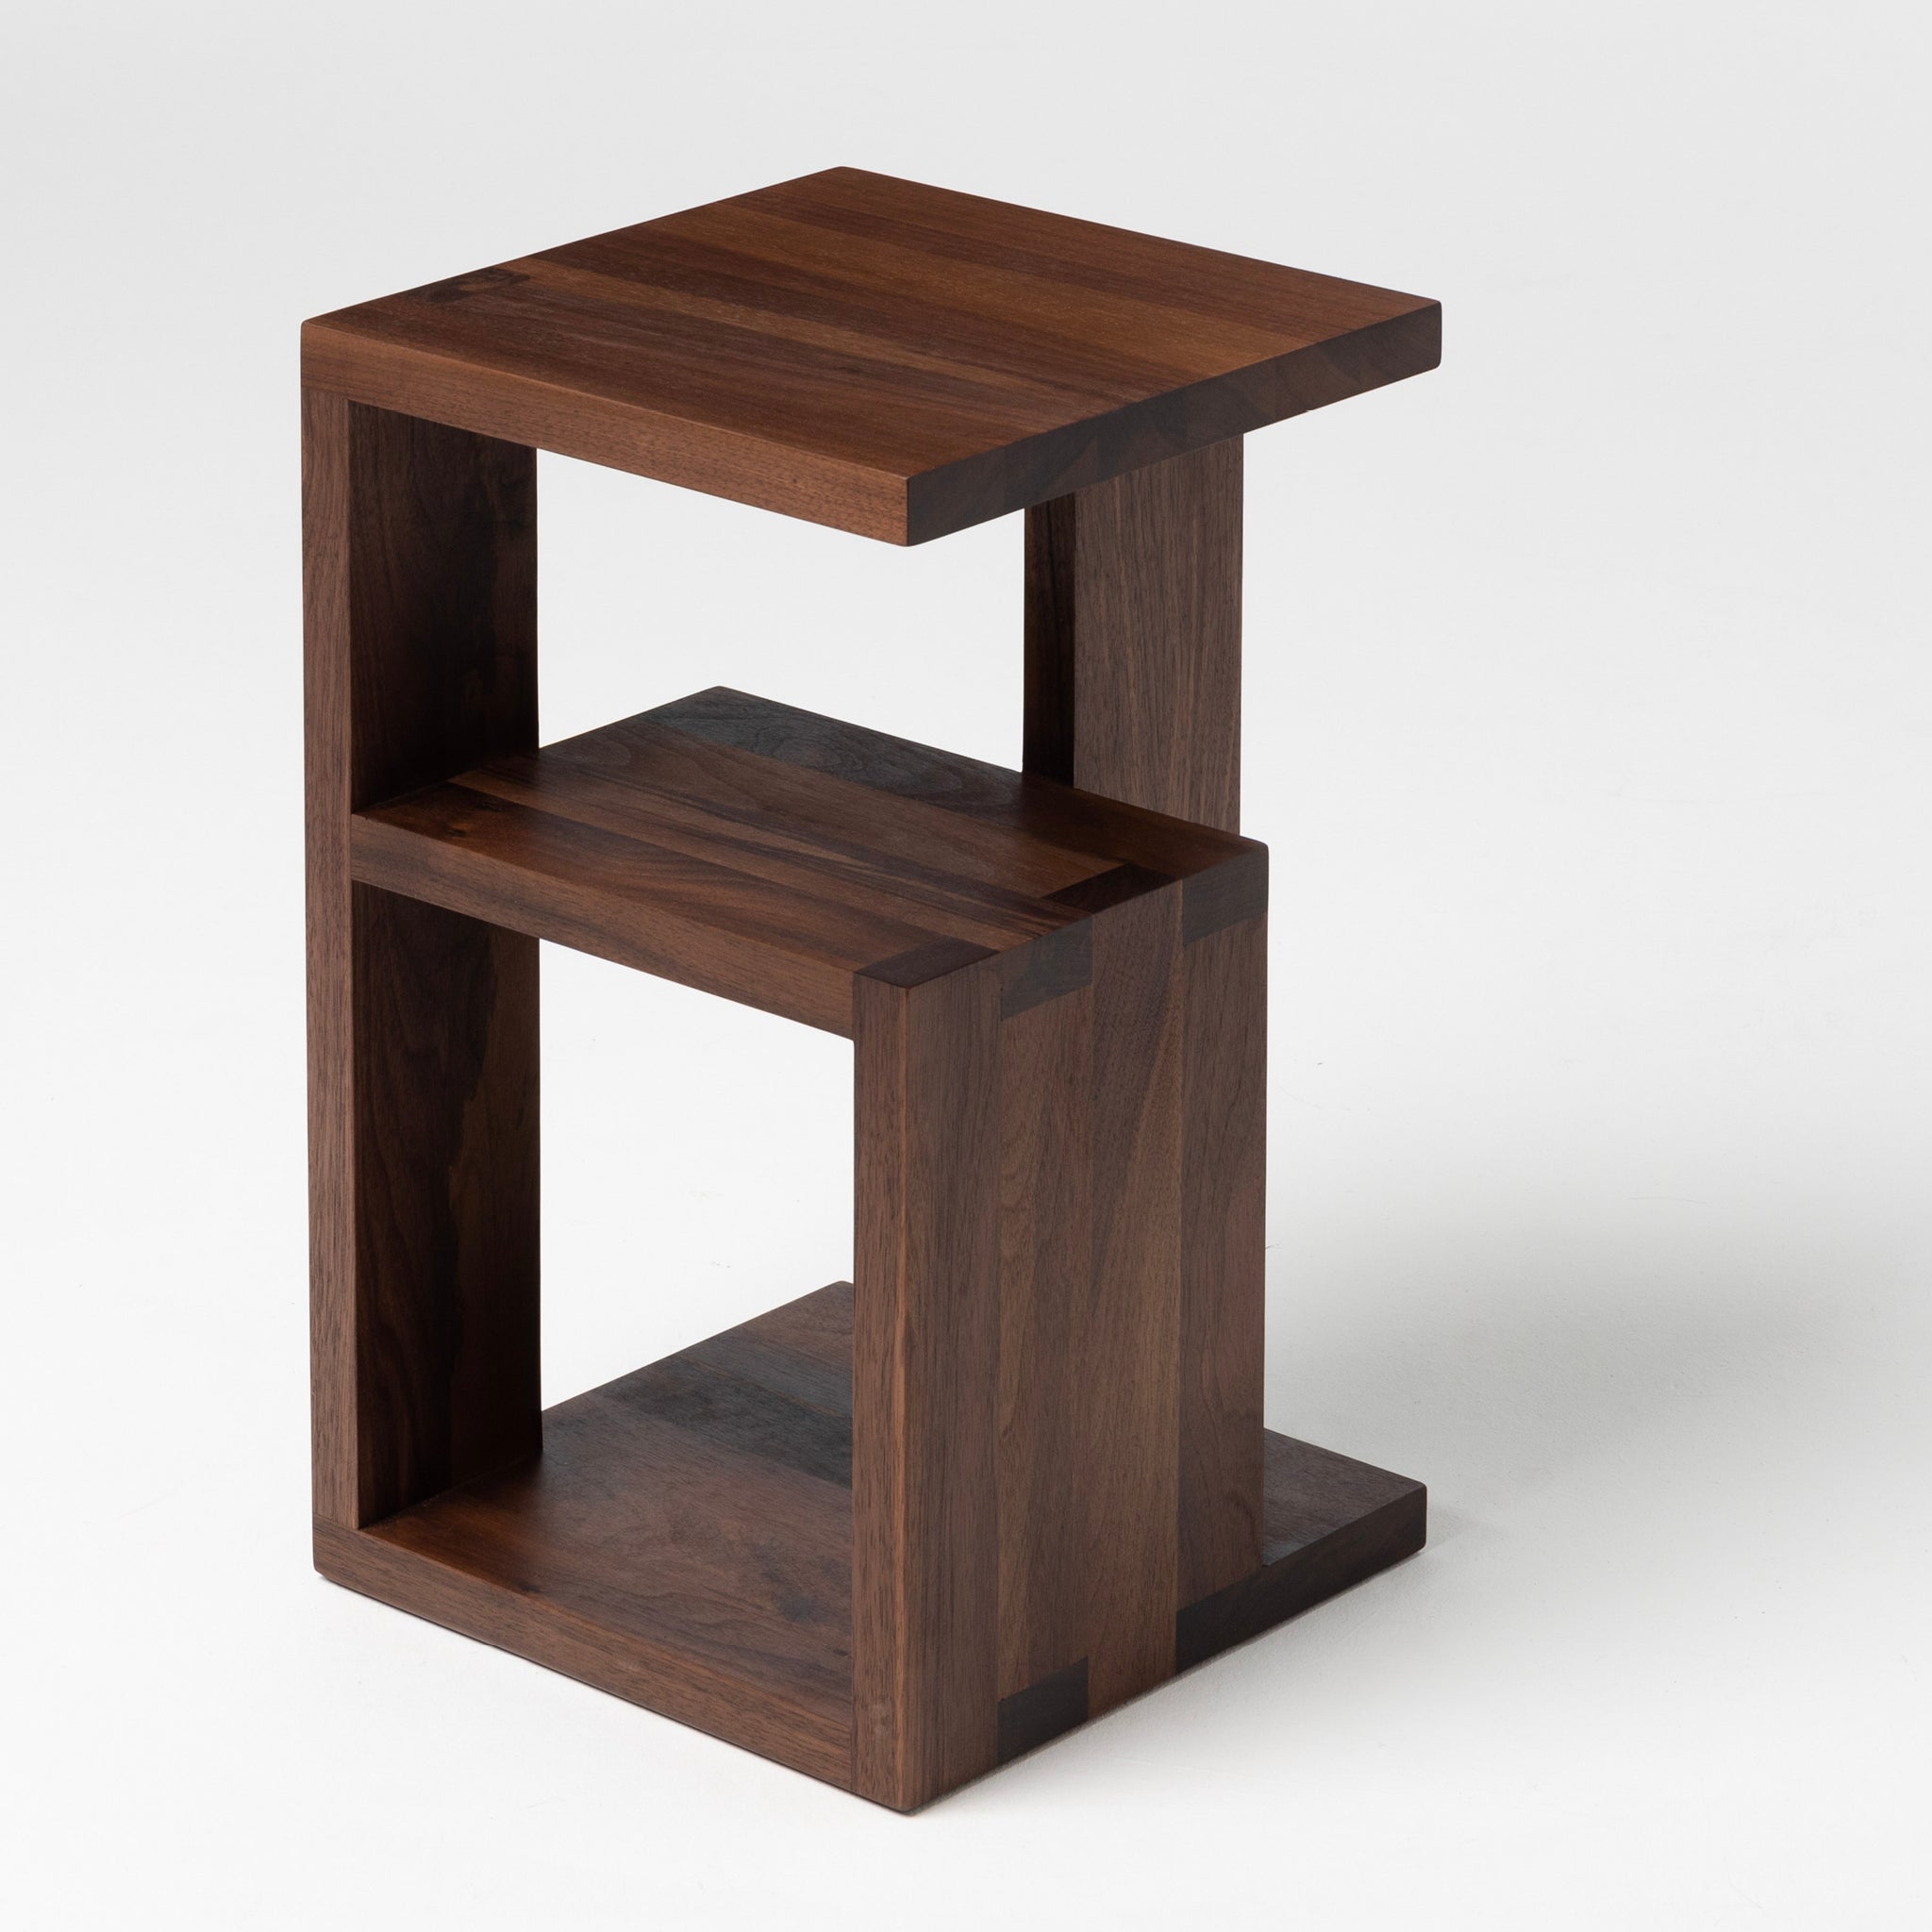 Constructivist Side Table by Matthew Hilton for SCP